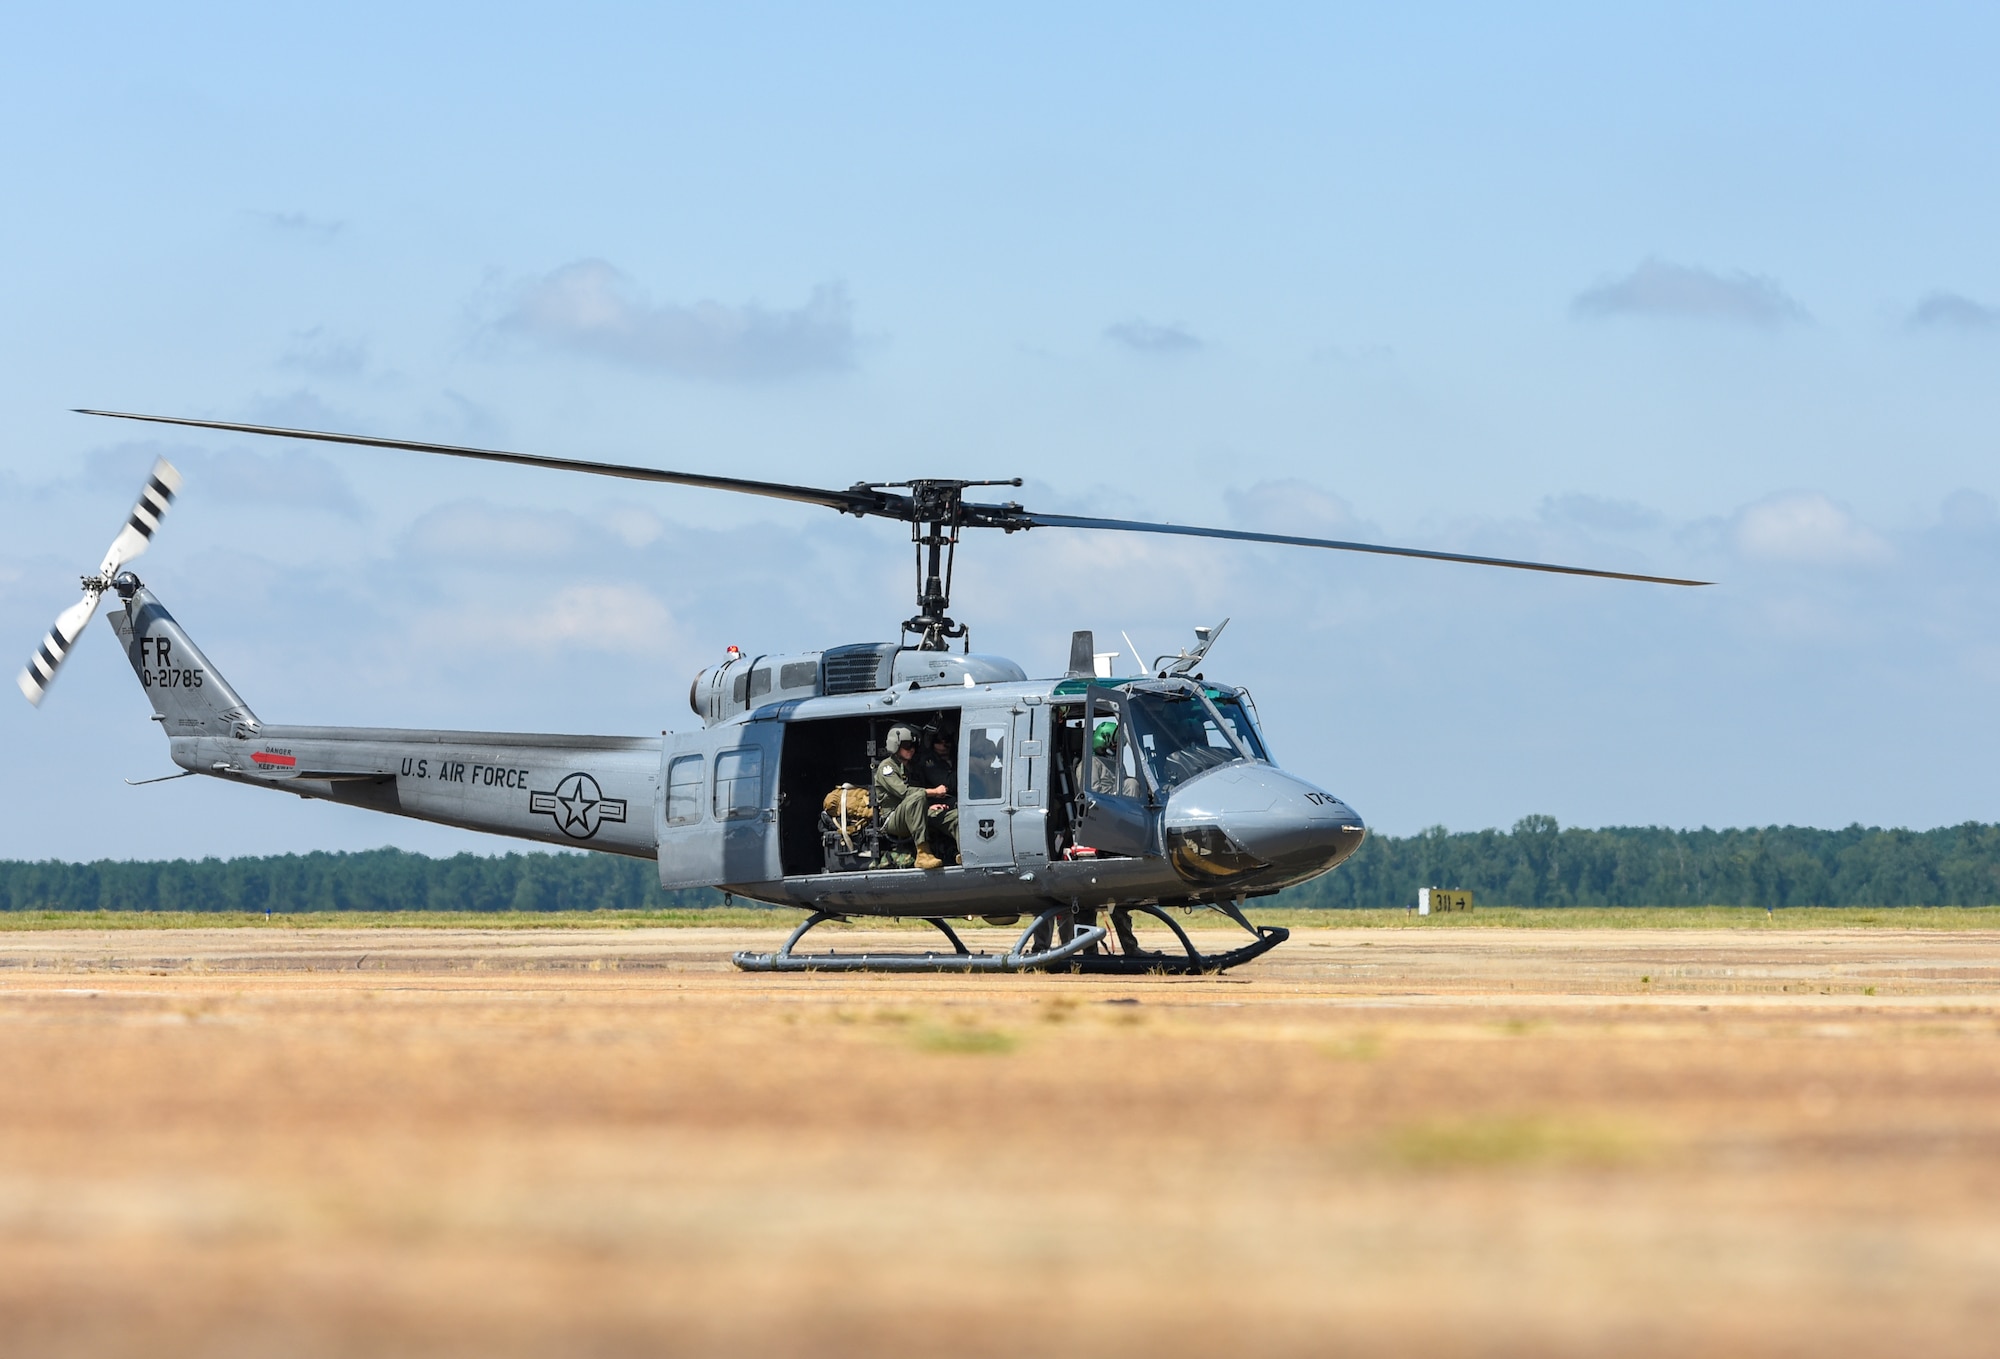 Airmen assigned to the 23rd Flying Training Squadron at Fort Rucker, Alabama land on the flightline in a UH-1N Huey on August 19, 2020, at Columbus Air Force Base, Miss. When configured for passengers, the UH-1N can seat up to 13 people, but actual passenger loads are dependent on fuel loads and atmospheric conditions. (U.S. Air Force photo by Airman 1st Class Davis Donaldson)